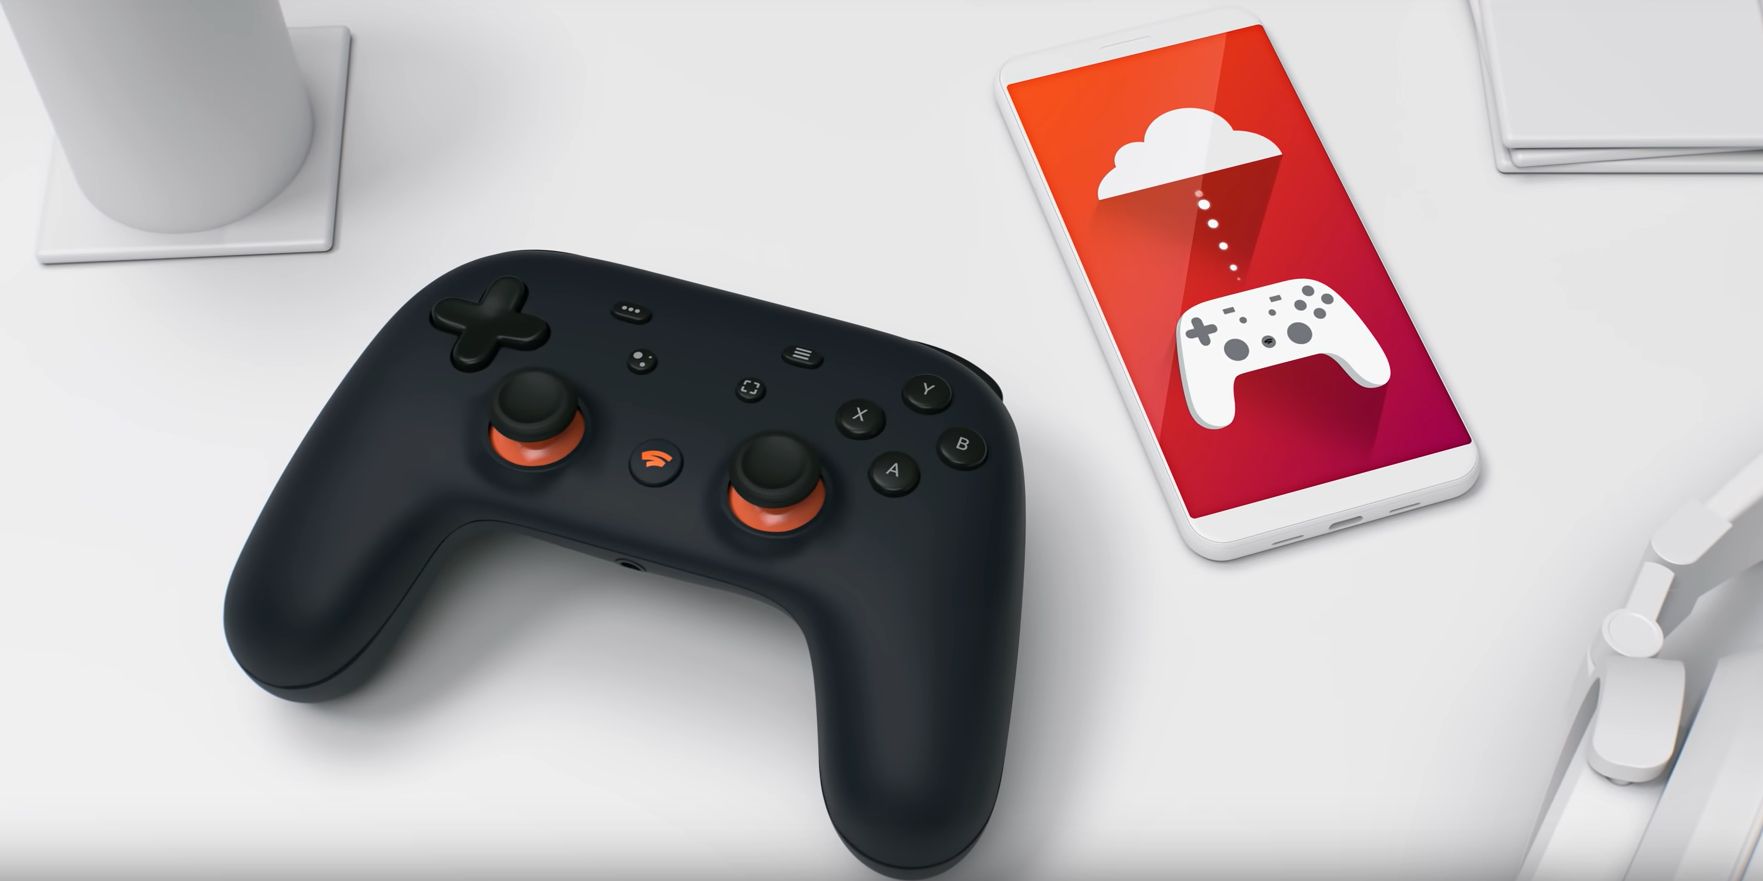 Google Stadia’s Lack of Games Due To Poor Incentives & Company Distrust